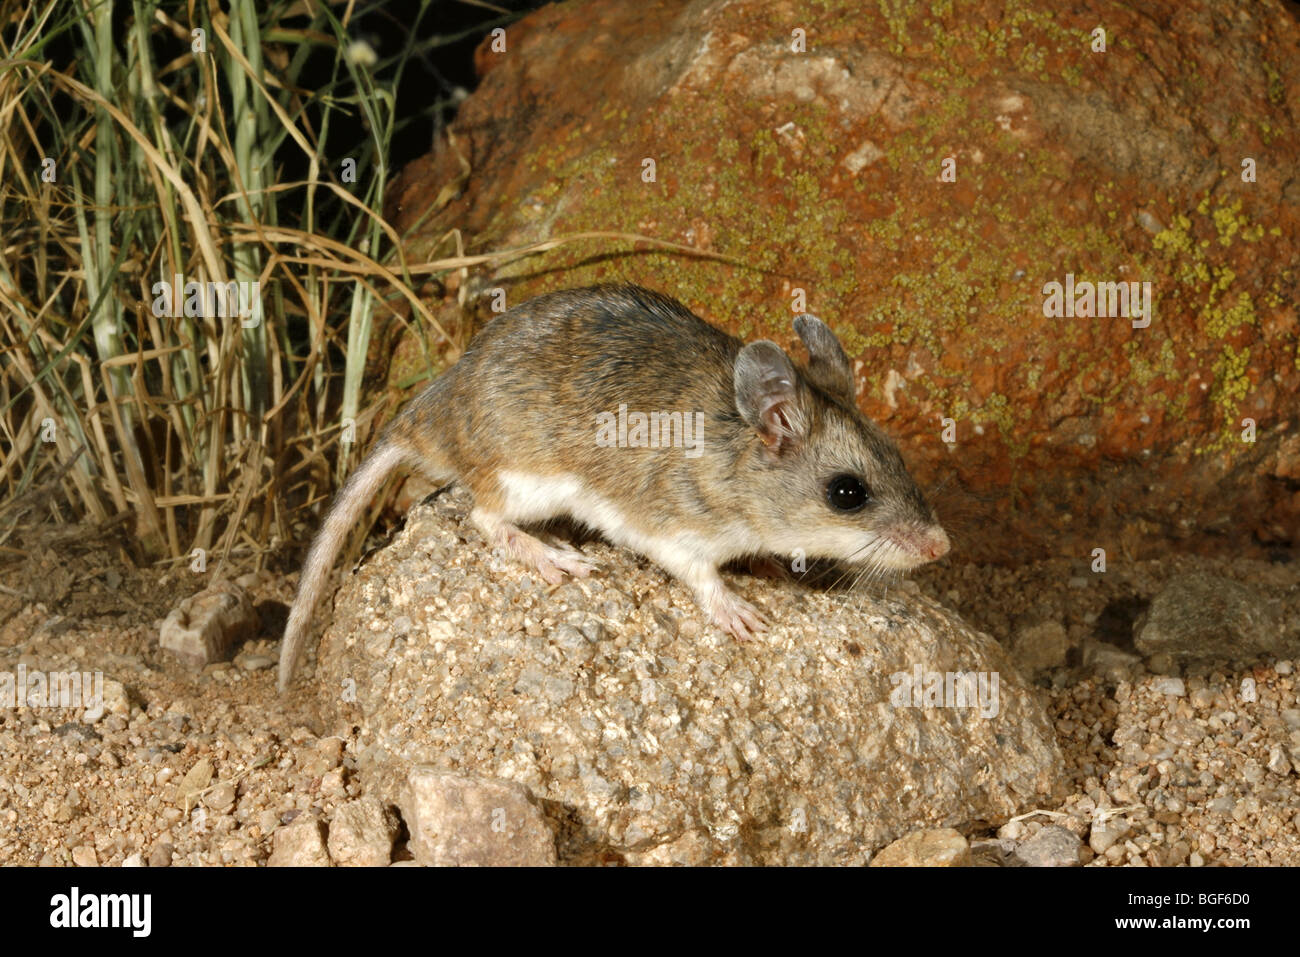 Northern Grasshopper Mouse Foto Stock